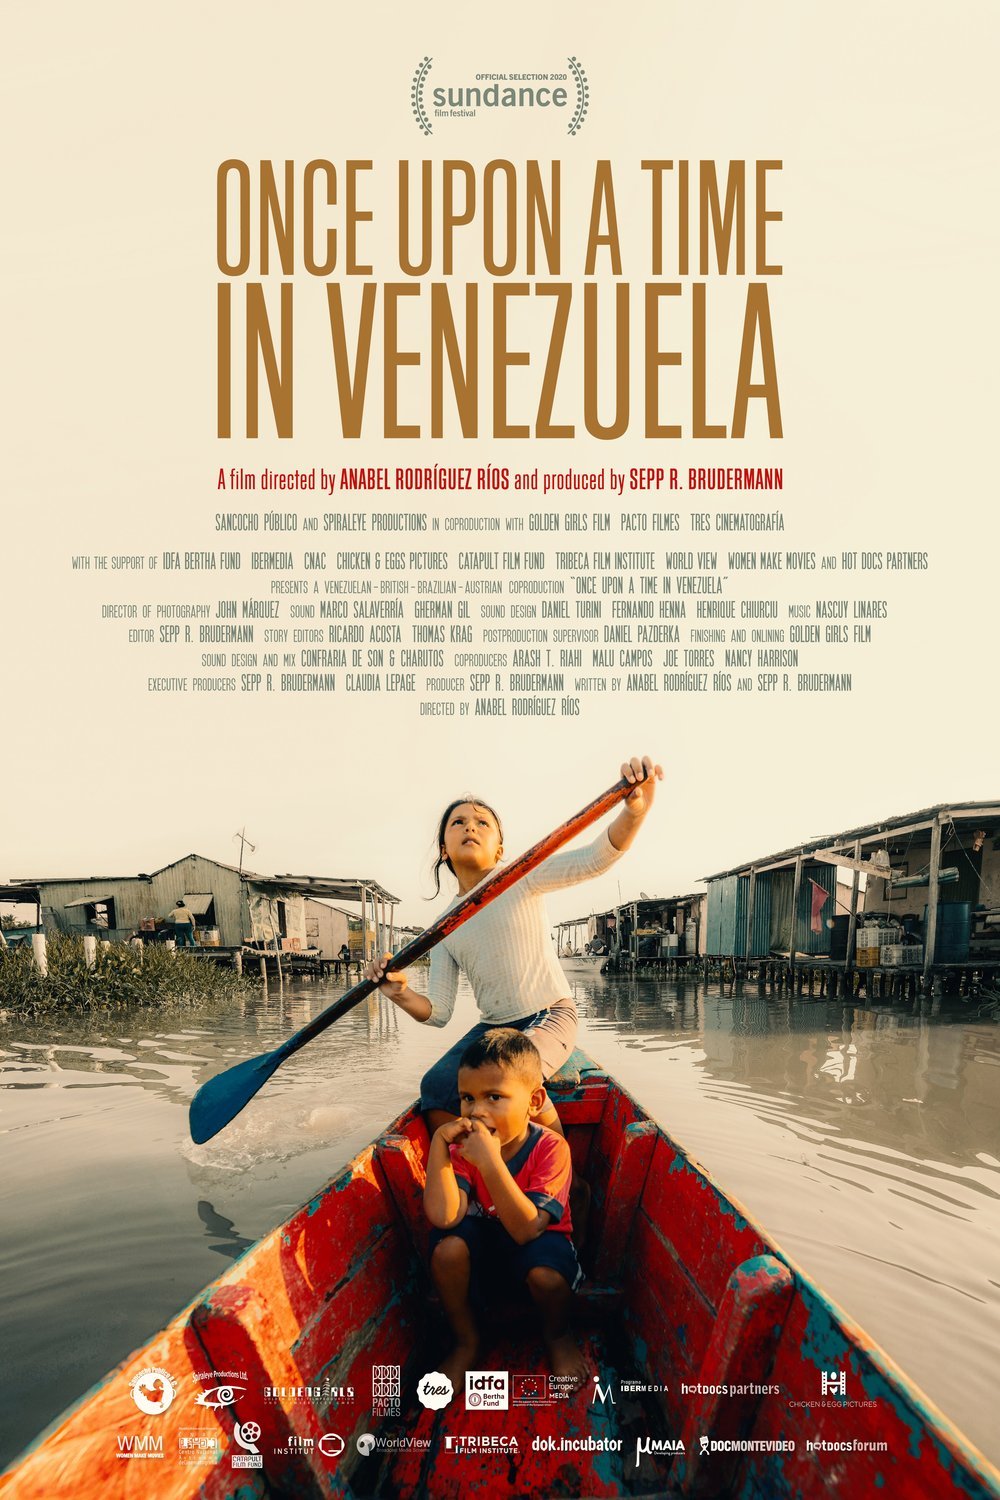 Spanish poster of the movie Once Upon a Time in Venezuela